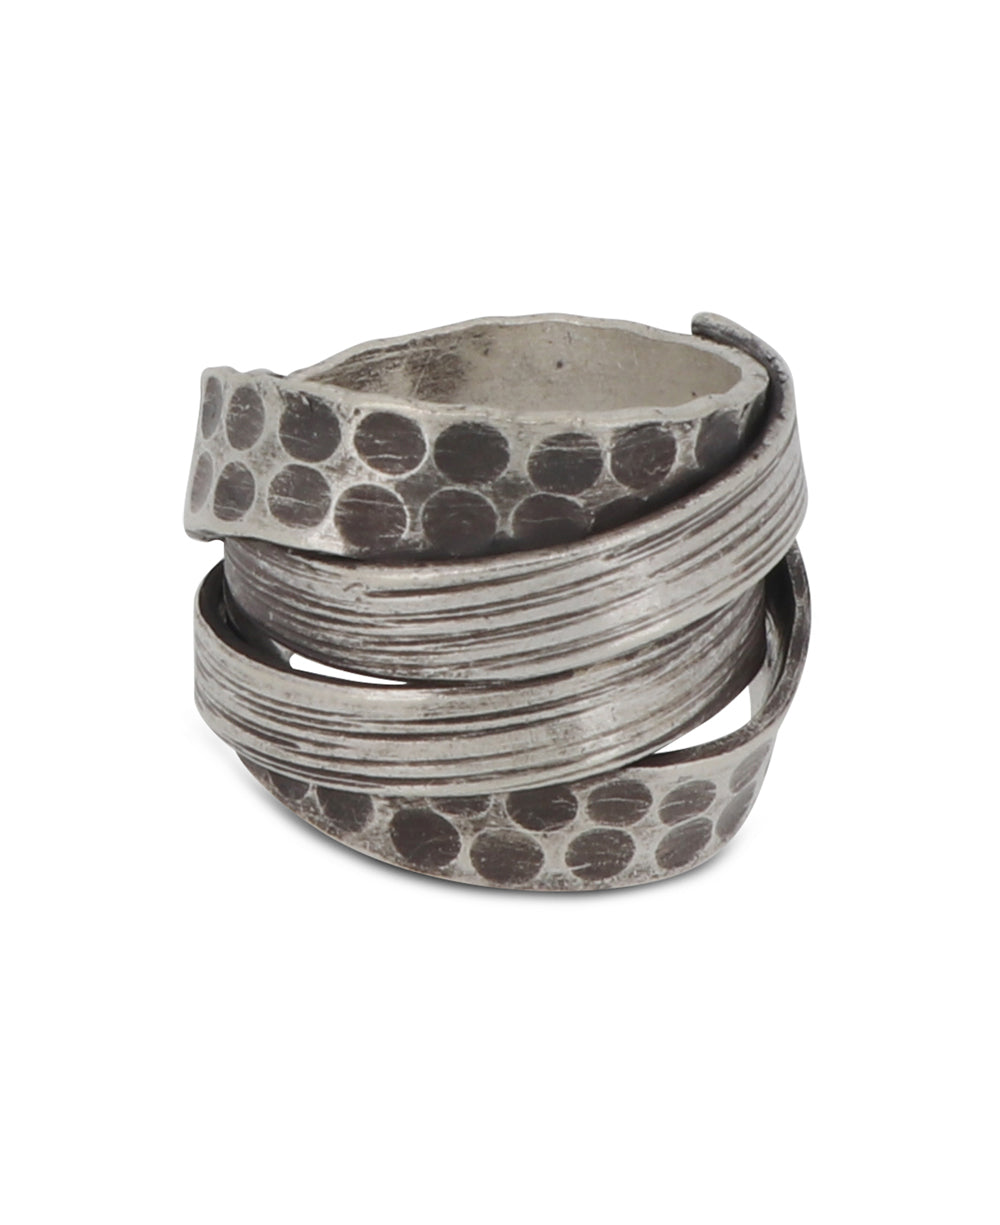 Hand-hammered textured ring